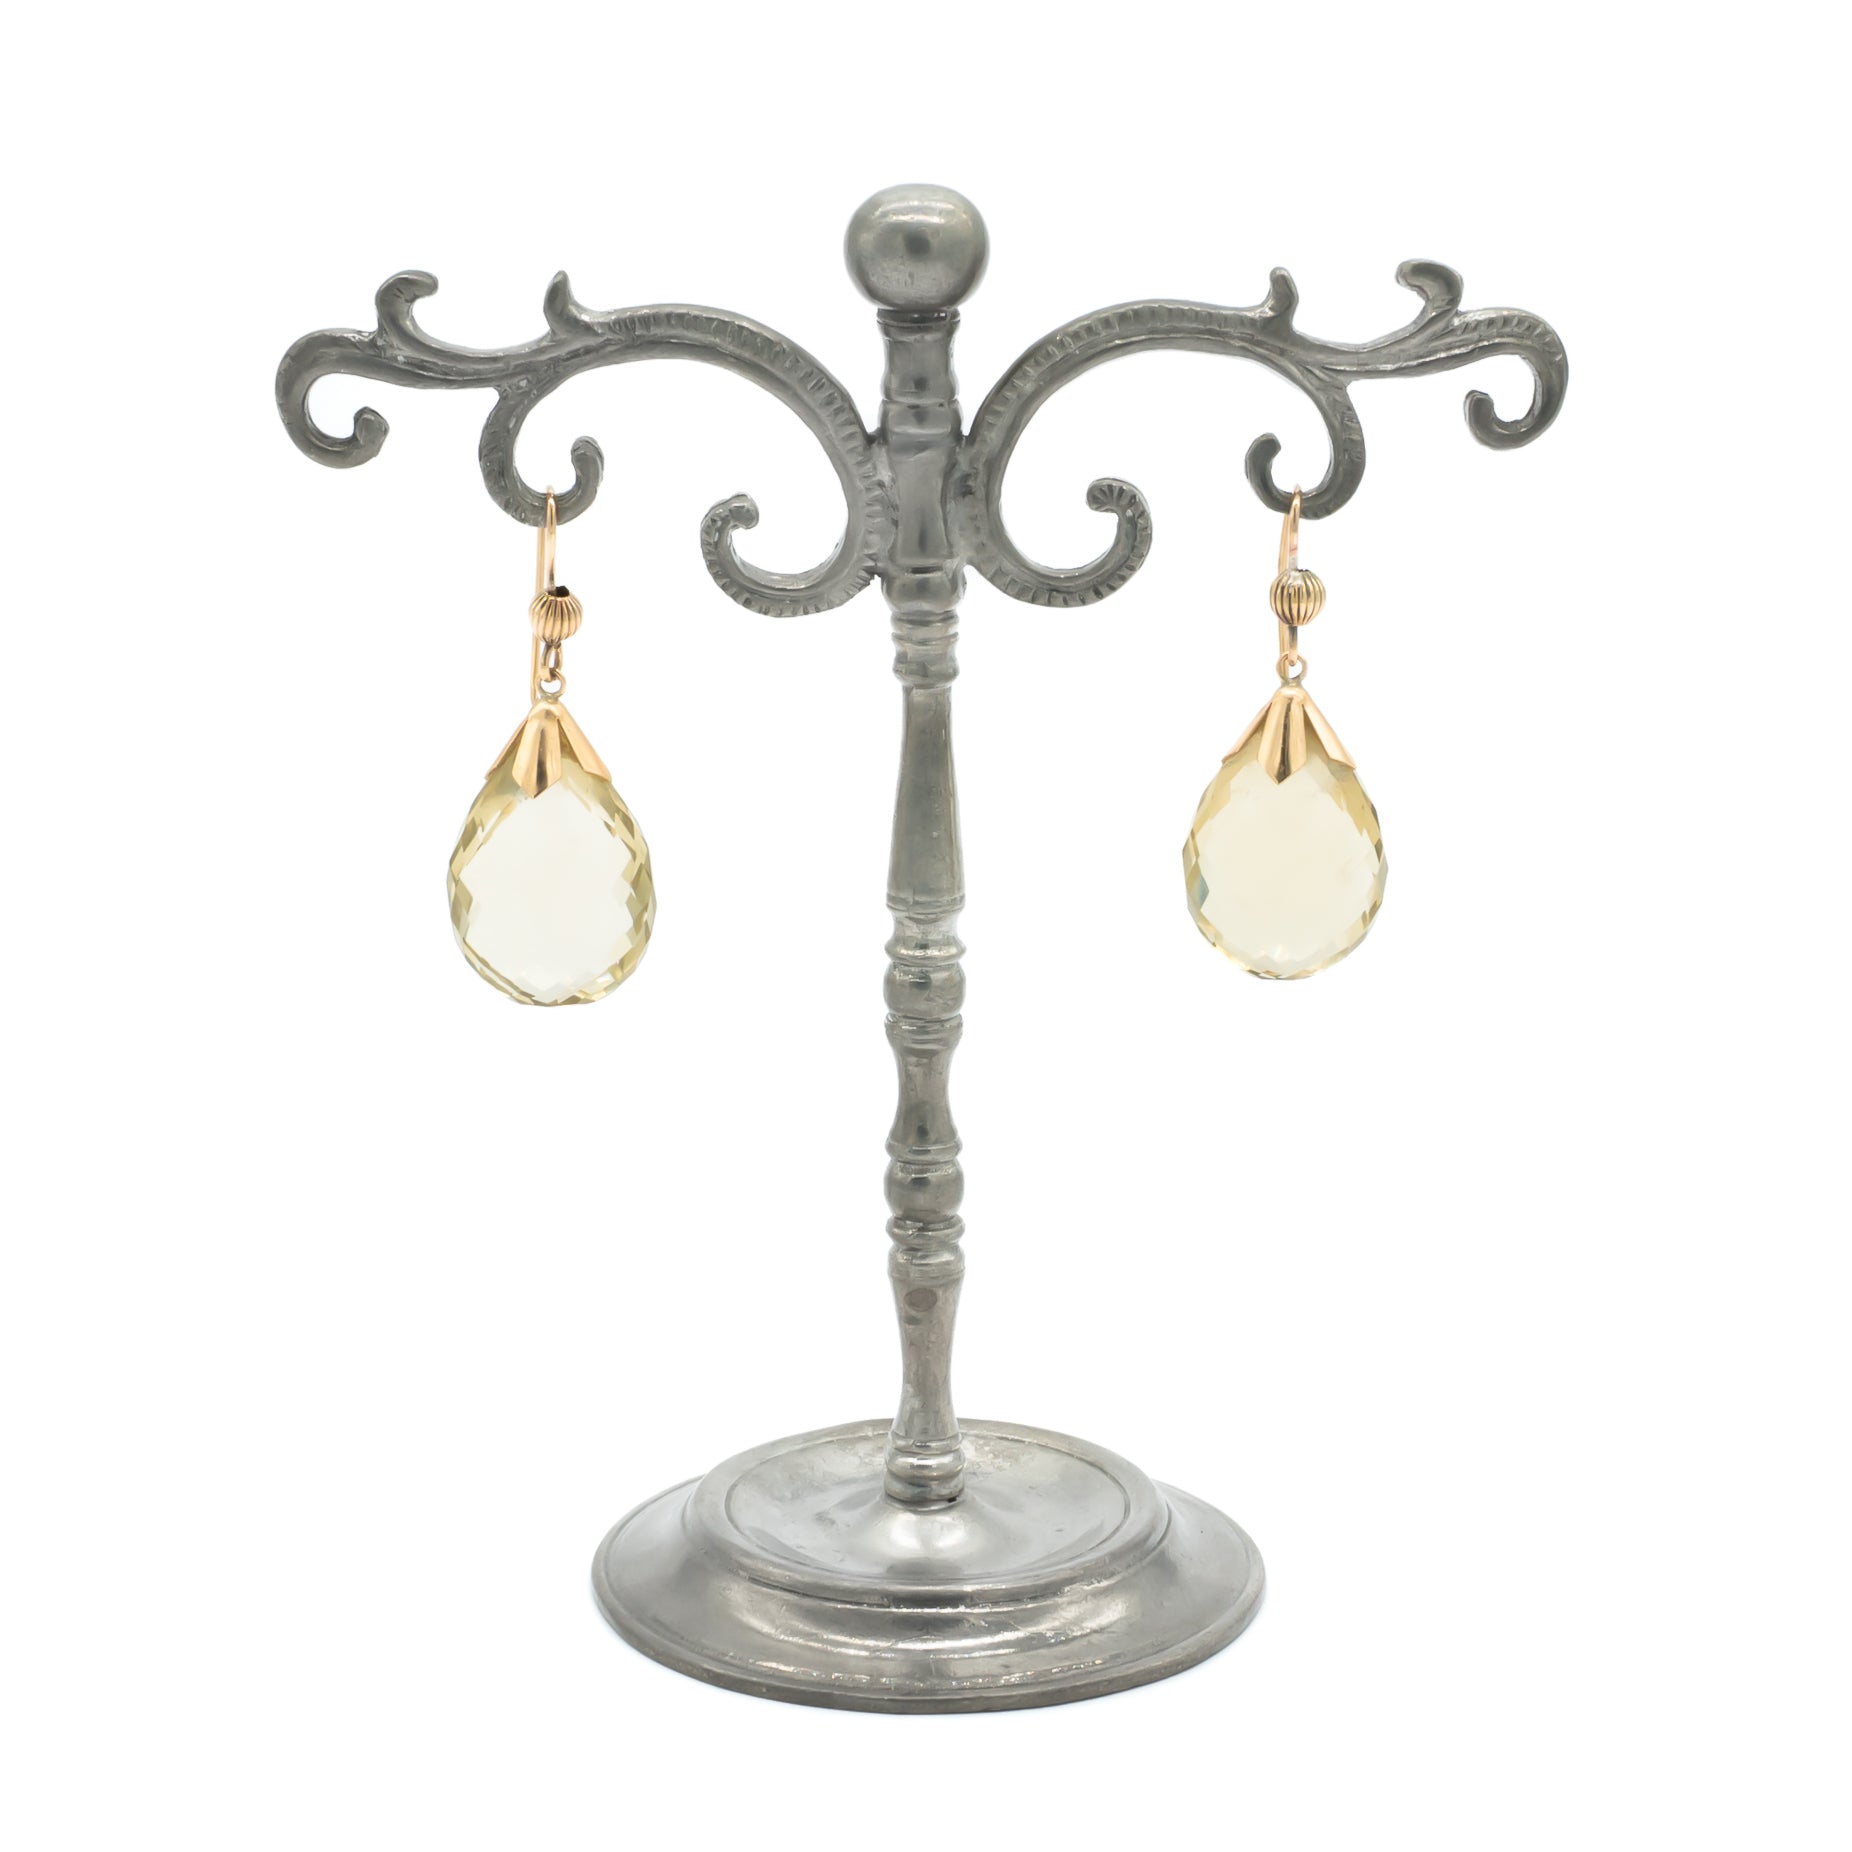 Classic 9ct gold earrings with beautifully faceted citrine drops and shepherd hooks. London